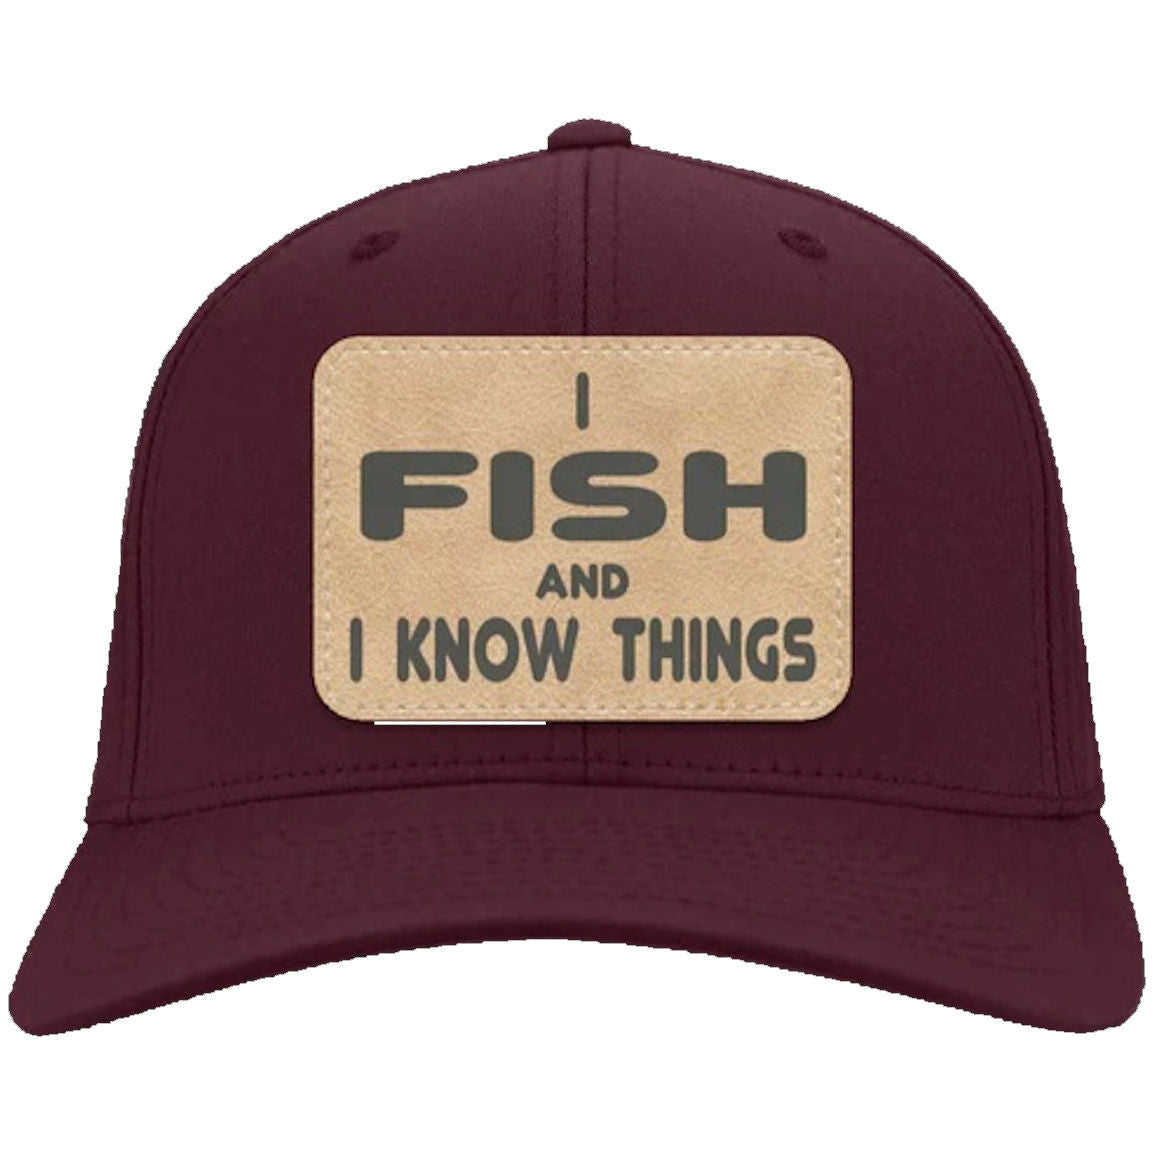 I Fish and Know Things Twill Cap maroon